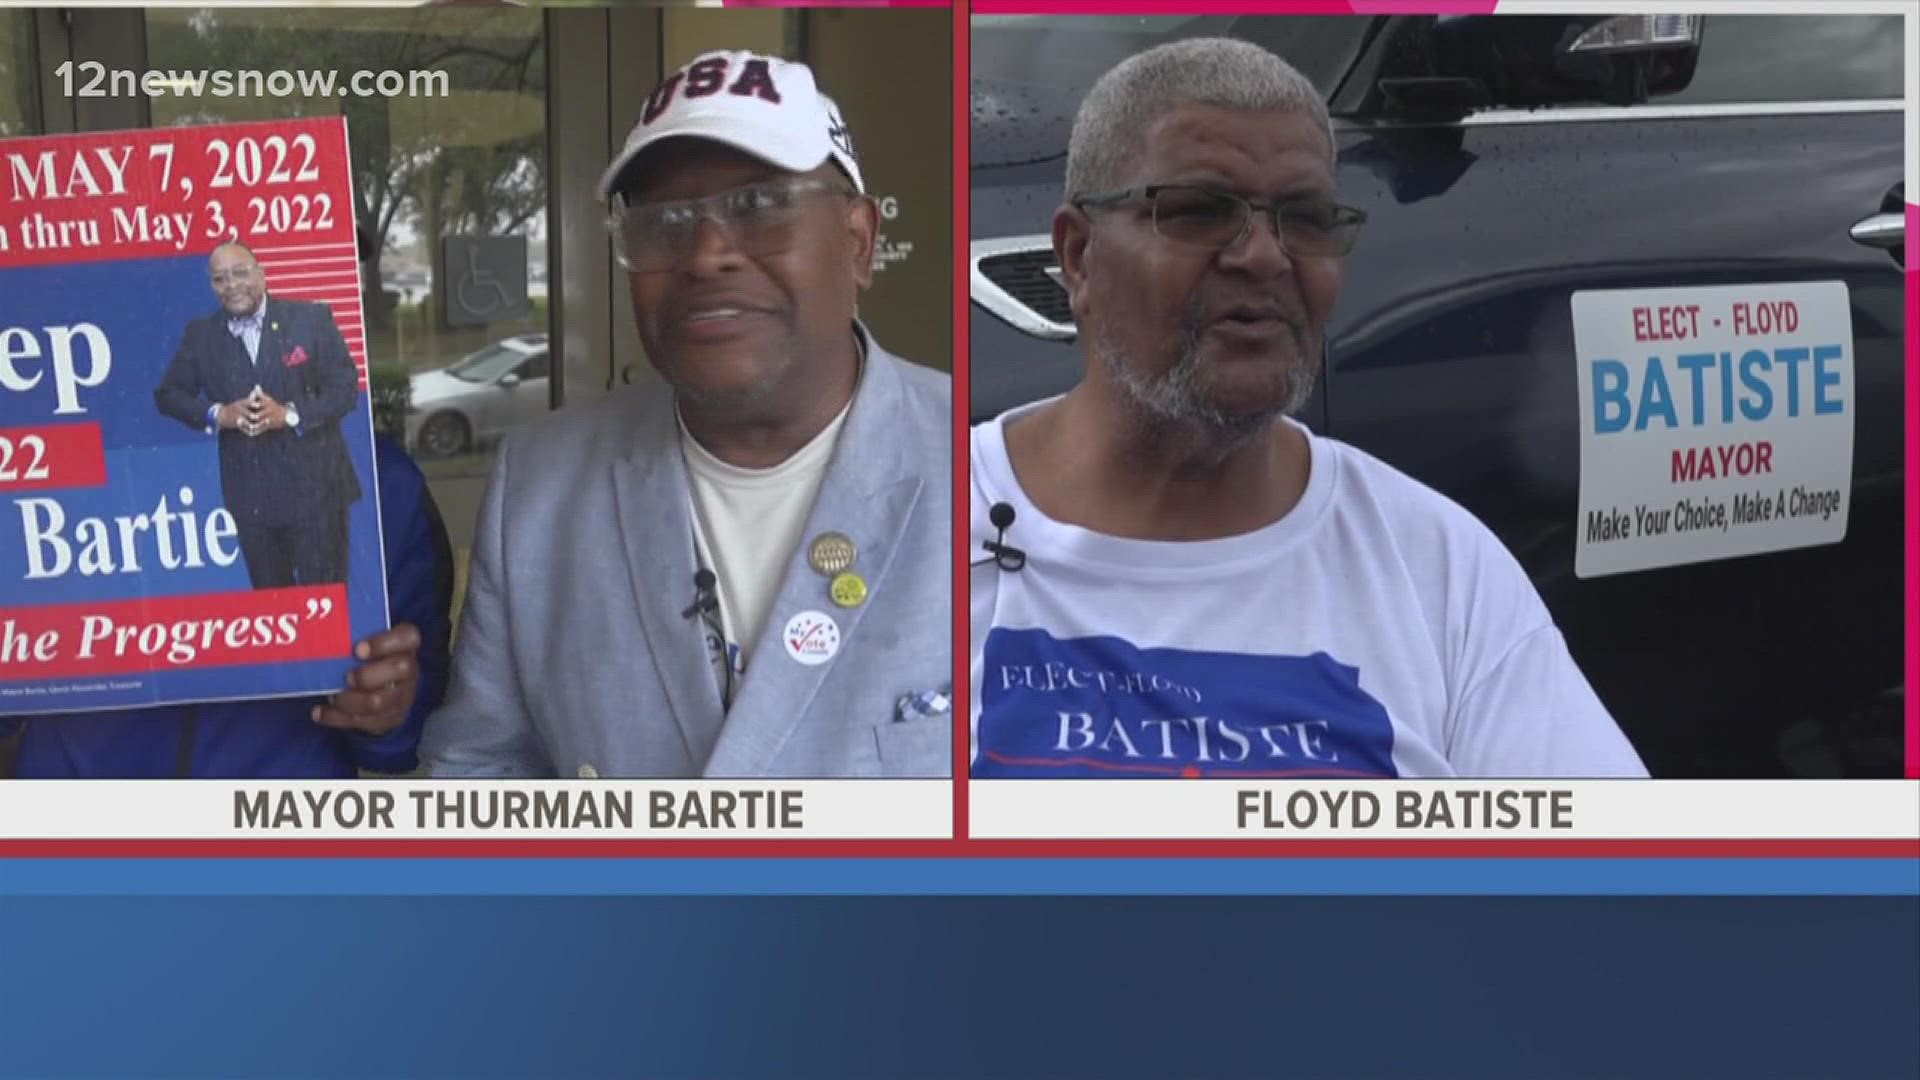 Candidates in the Port Arthur mayoral runoff race are sending out last-minute messages to voters ahead of Saturday’s election.